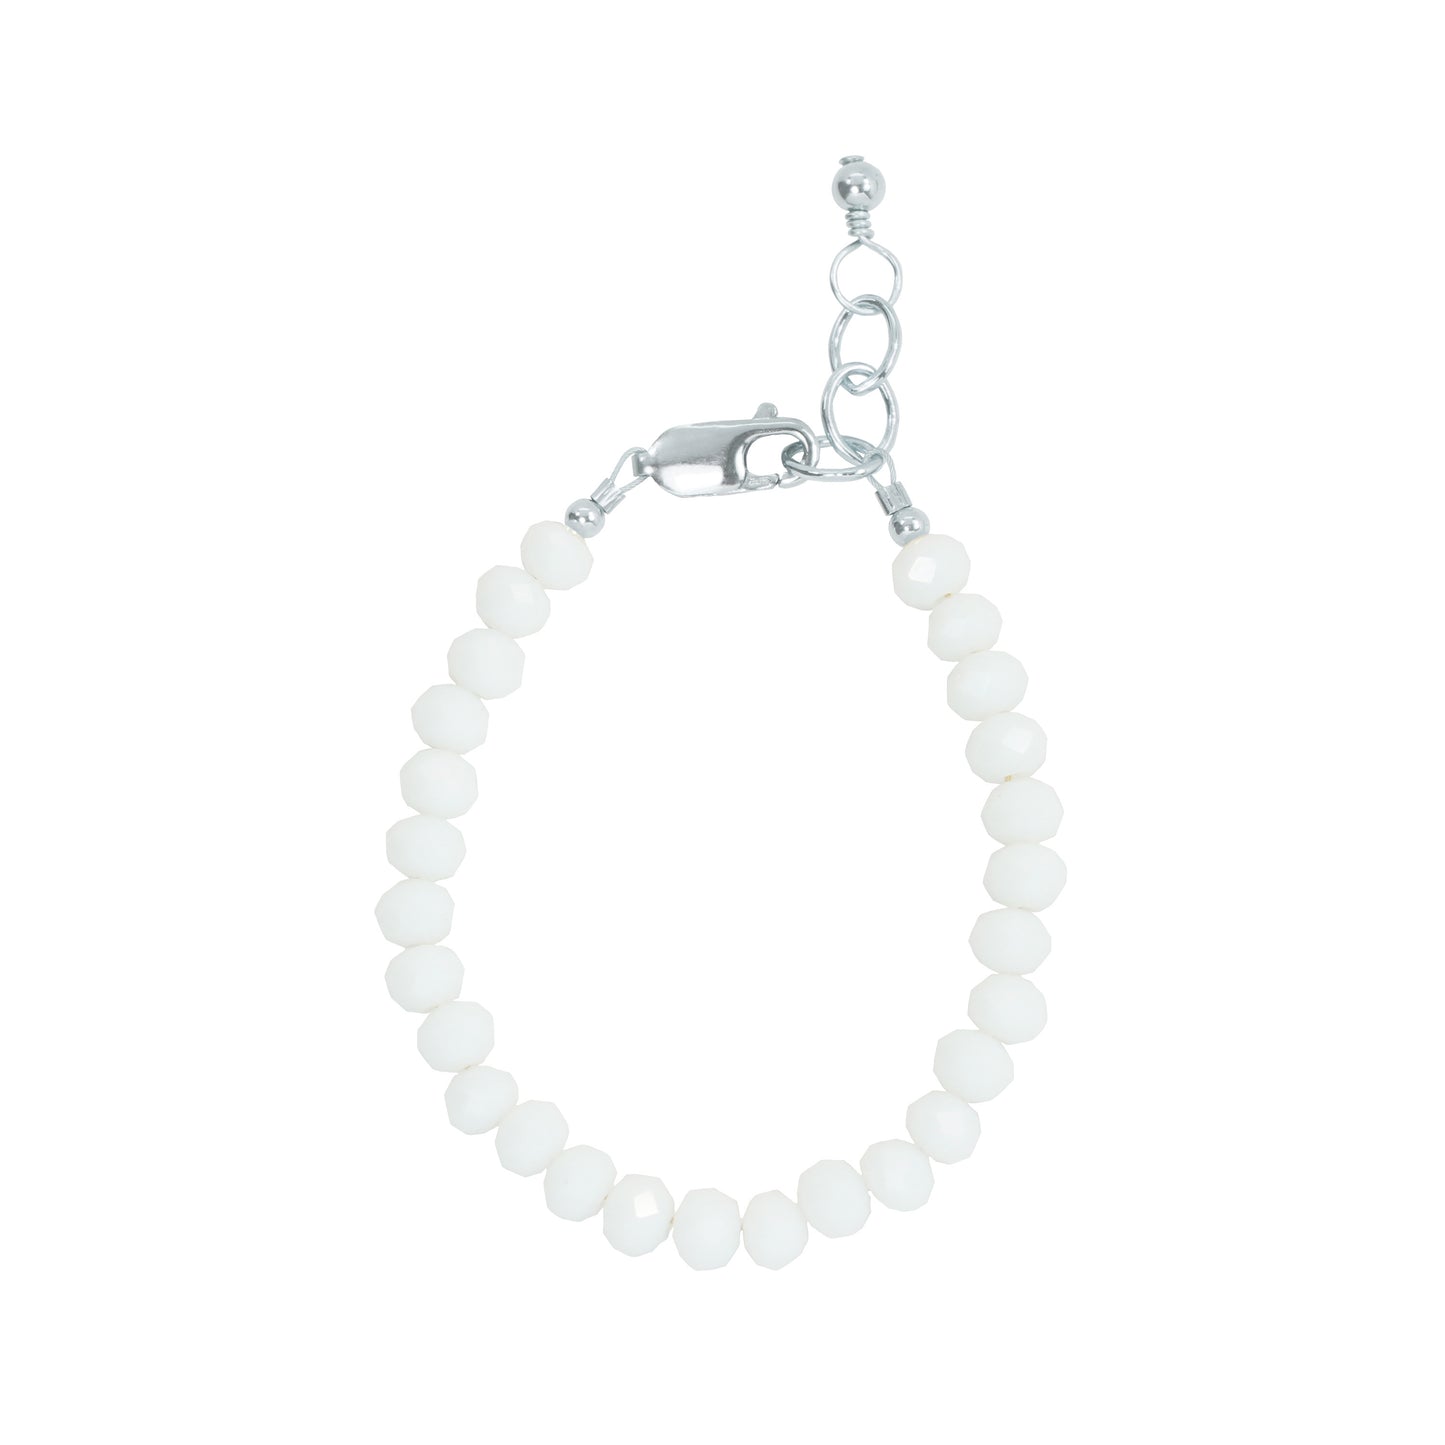 Stretchy Glacier Adult Bracelet (6mm Beads) 7.5 Inches / Sterling Silver